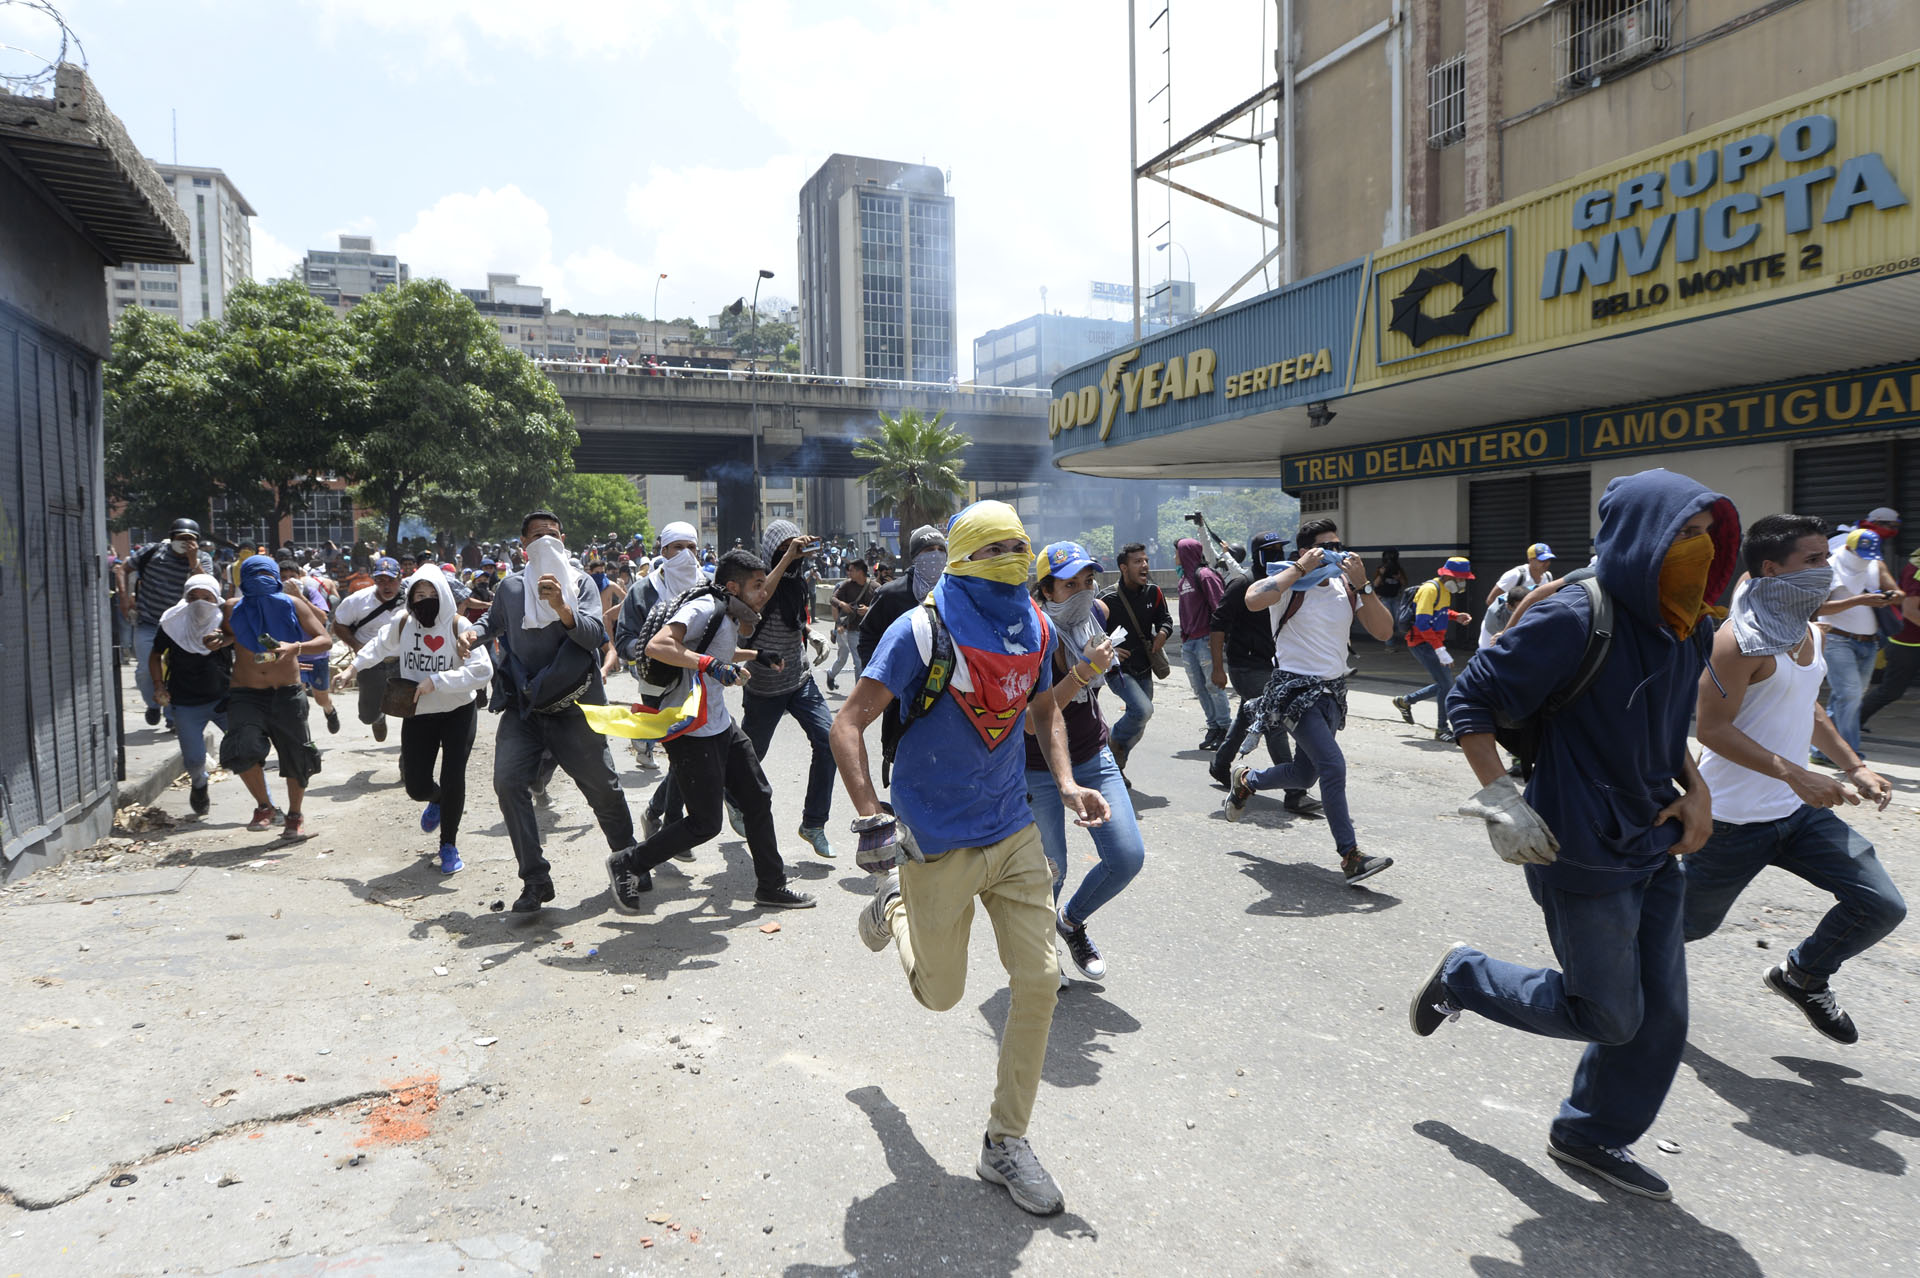 Venezuelan opposition activists run during protests against the government of President Nicolas Maduro on April 6, 2017 in Caracas. The center-right opposition vowed fresh street protests -after earlier unrest left dozens of people injured - to increase pressure on Maduro, whom they blame for the country's economic crisis. / AFP PHOTO / FEDERICO PARRA